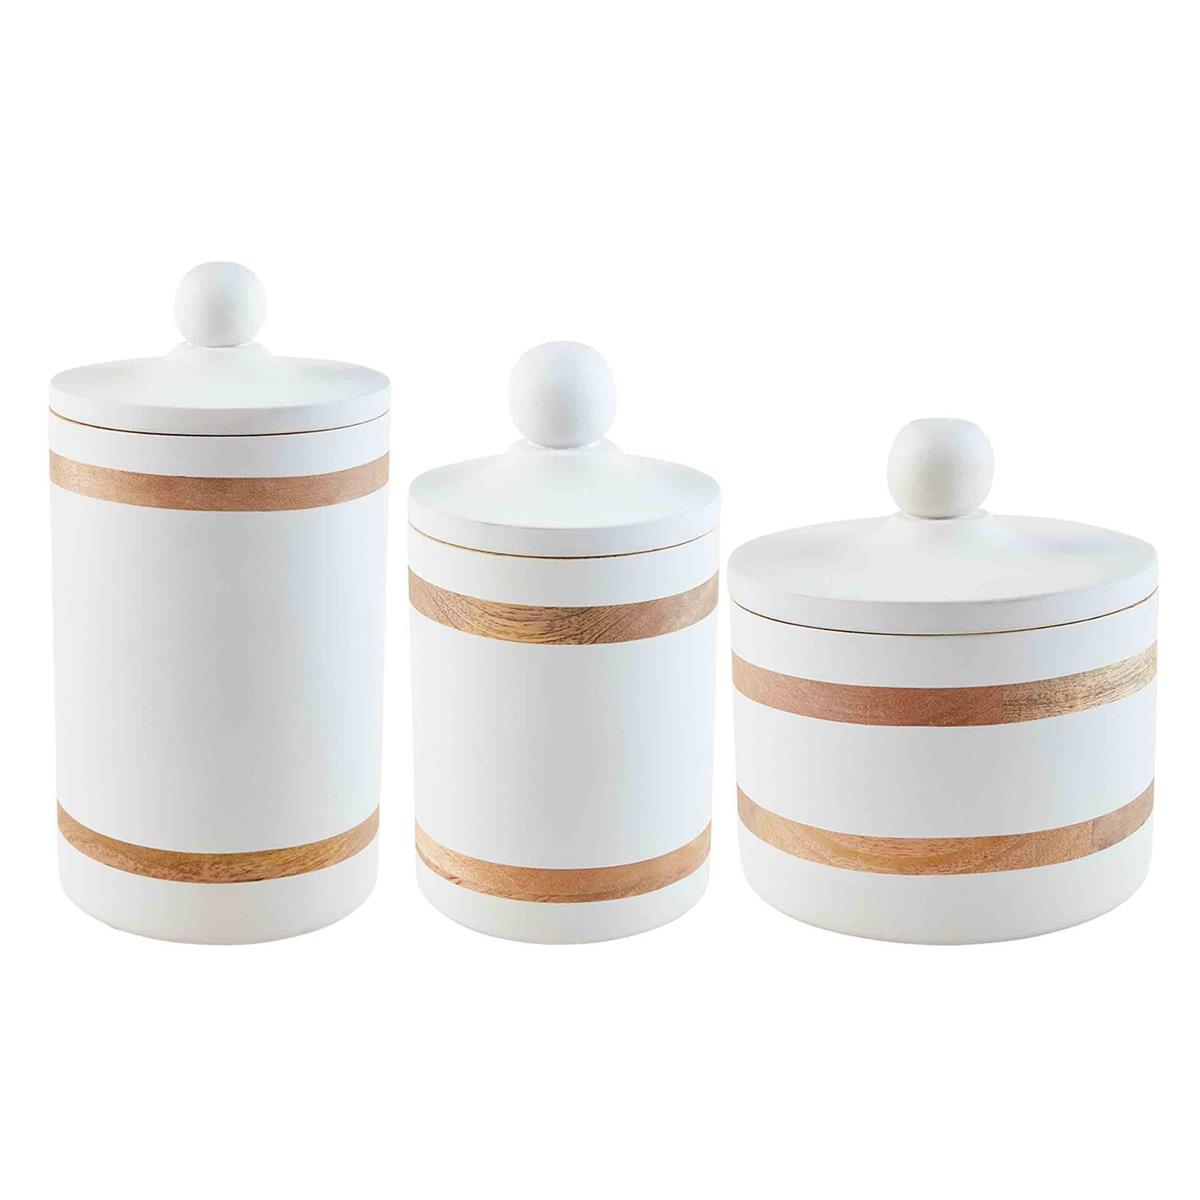 Wood Strap Canisters